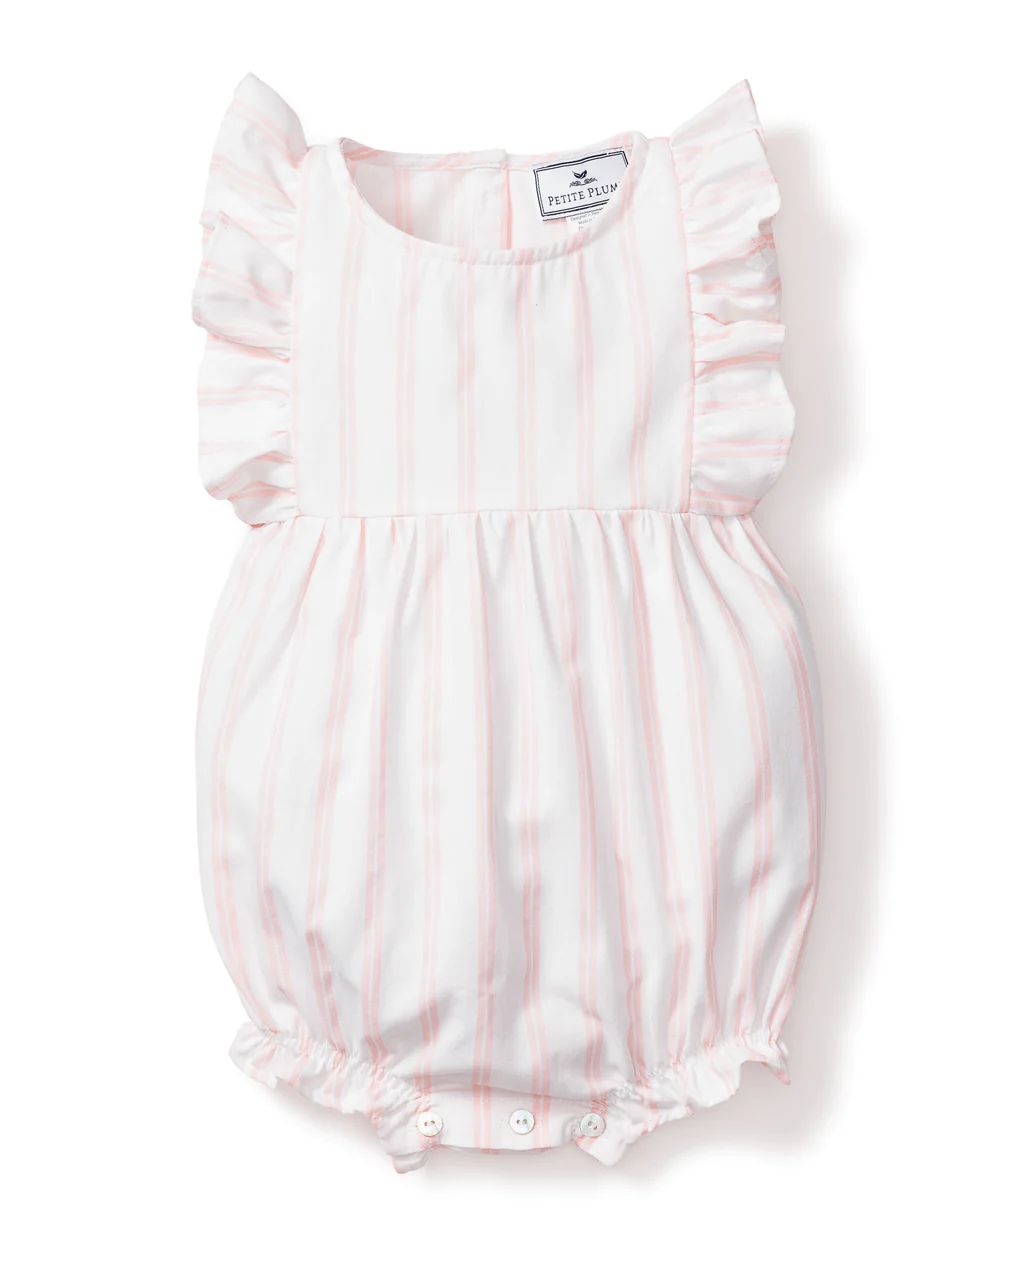 Baby's Twill Stripe Ruffled Romper in Pink and White Stripe | Petite Plume